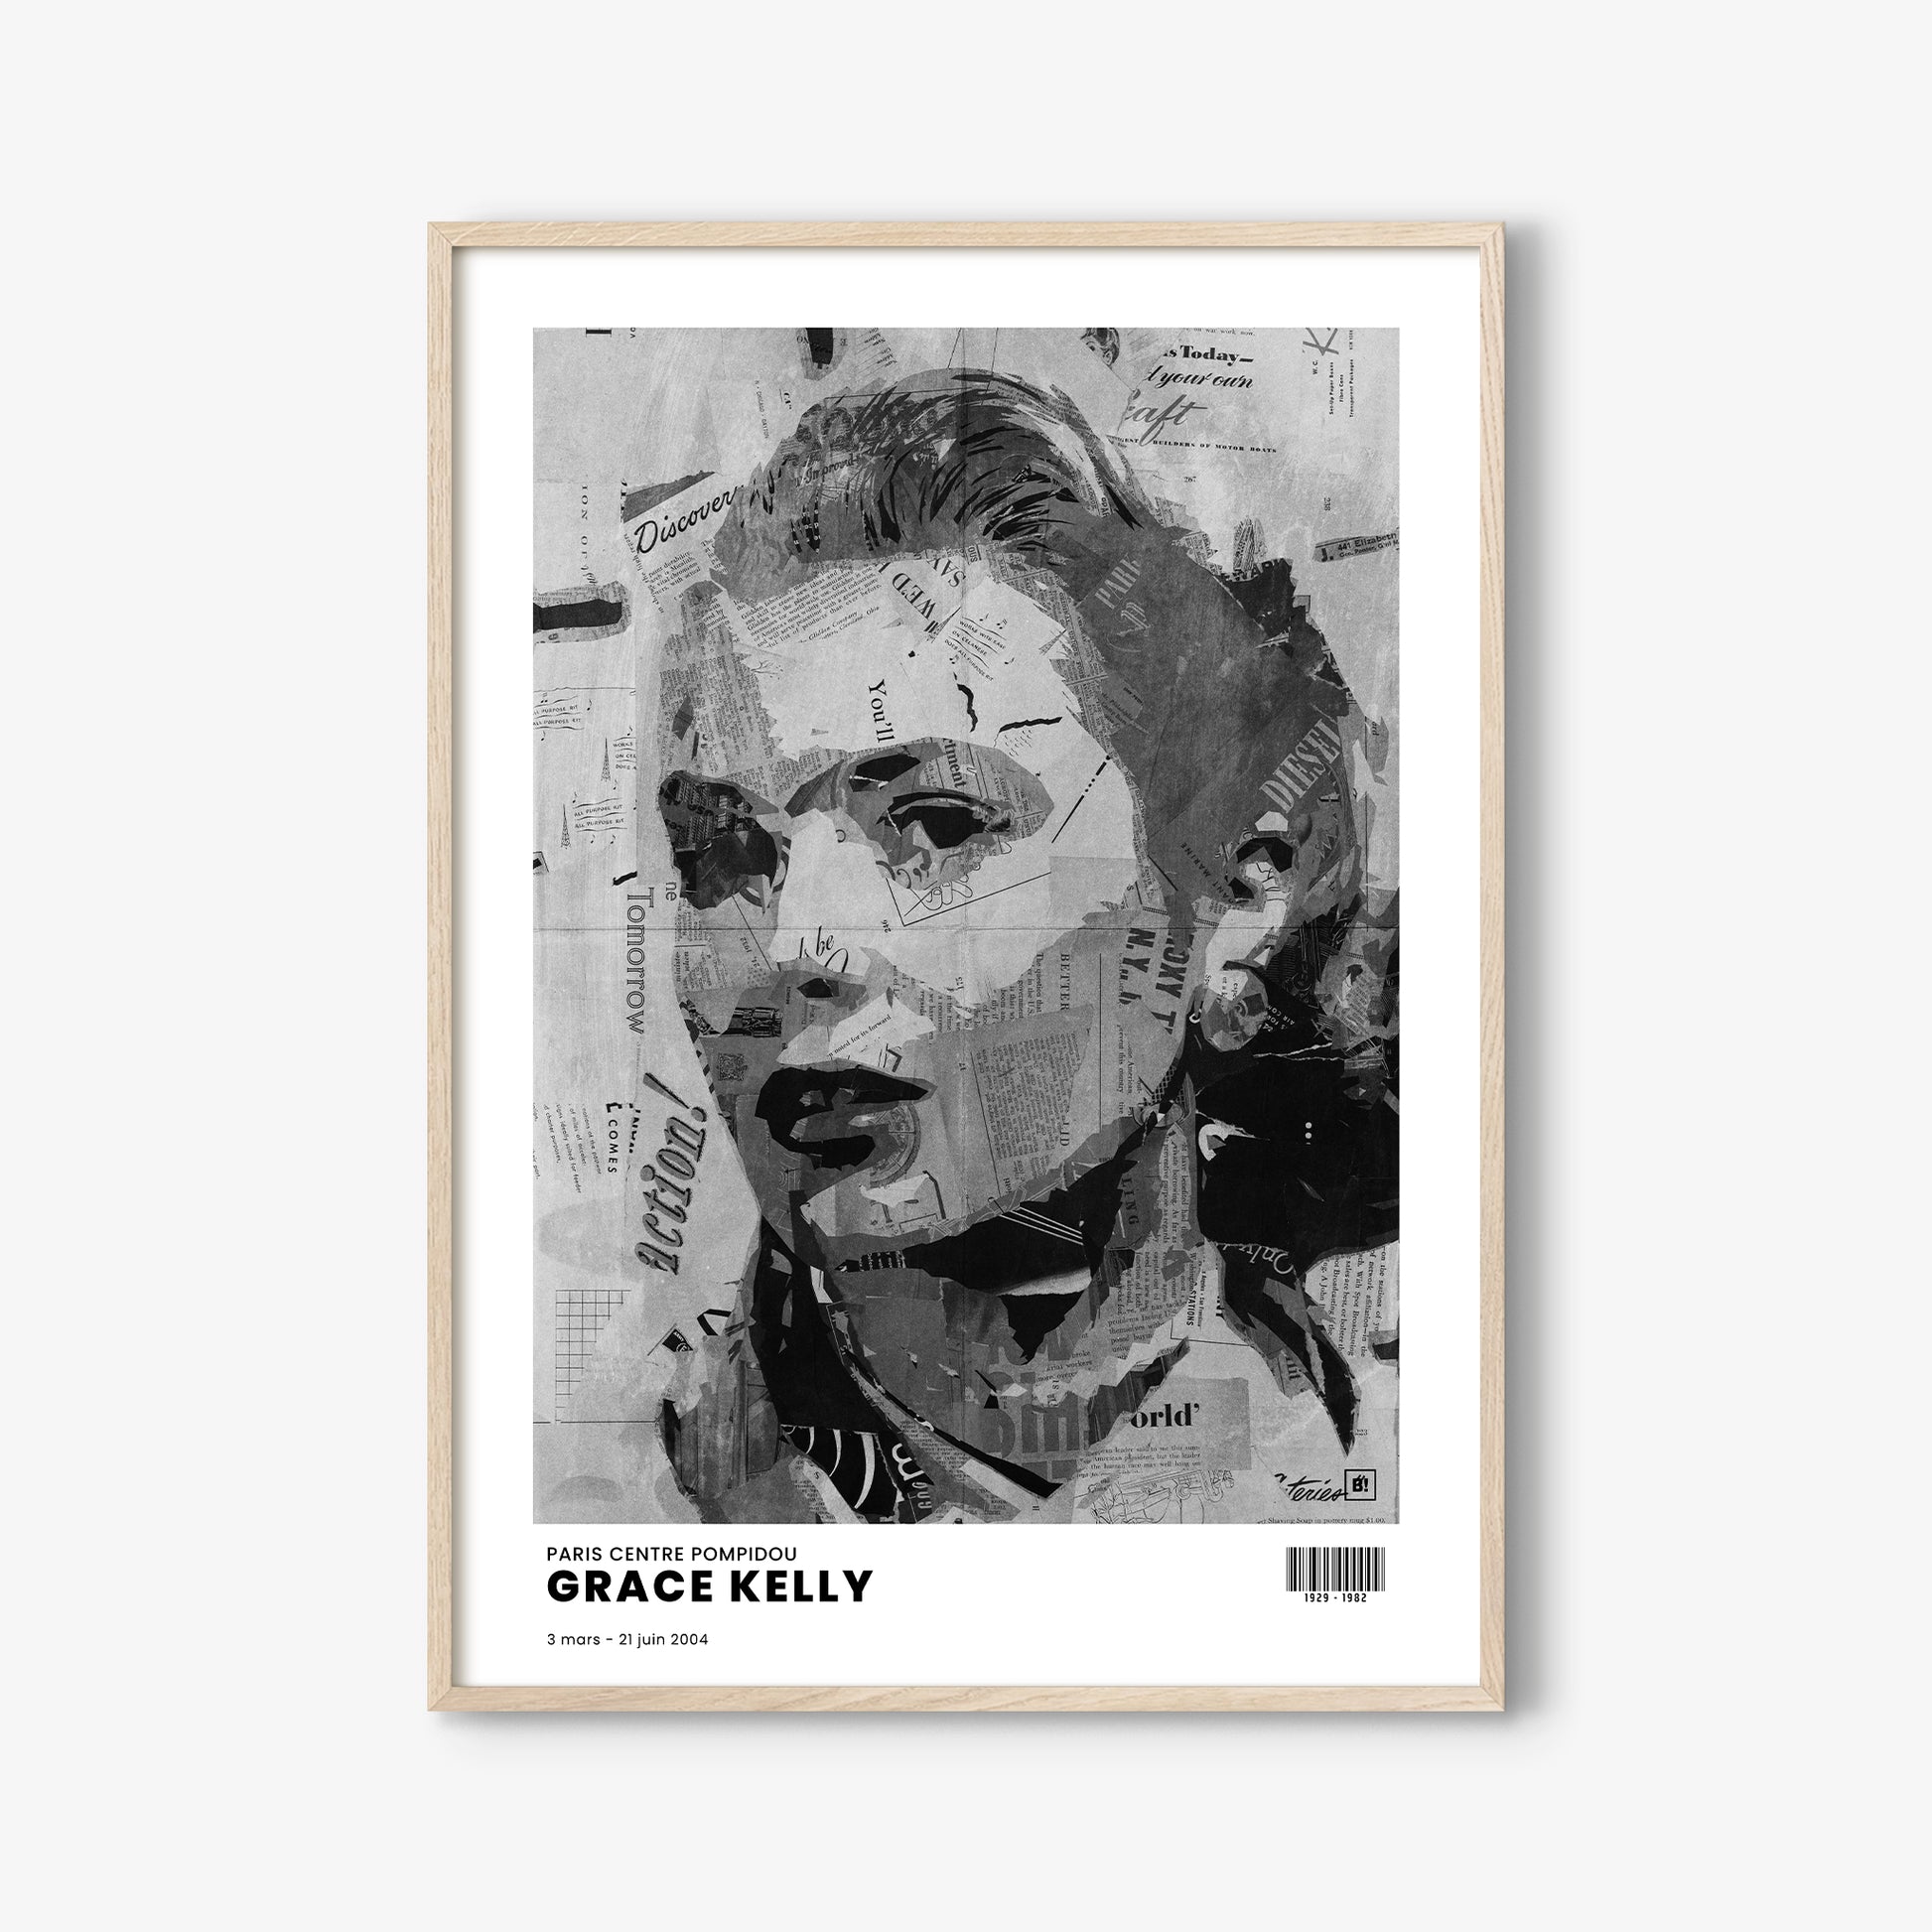 Be inspired by Iconic Grace Kelly Paris Centre Pompidou Exhibition Art Print. The artwork is presented in a white oak frame that captures its timeless beauty in every detail.